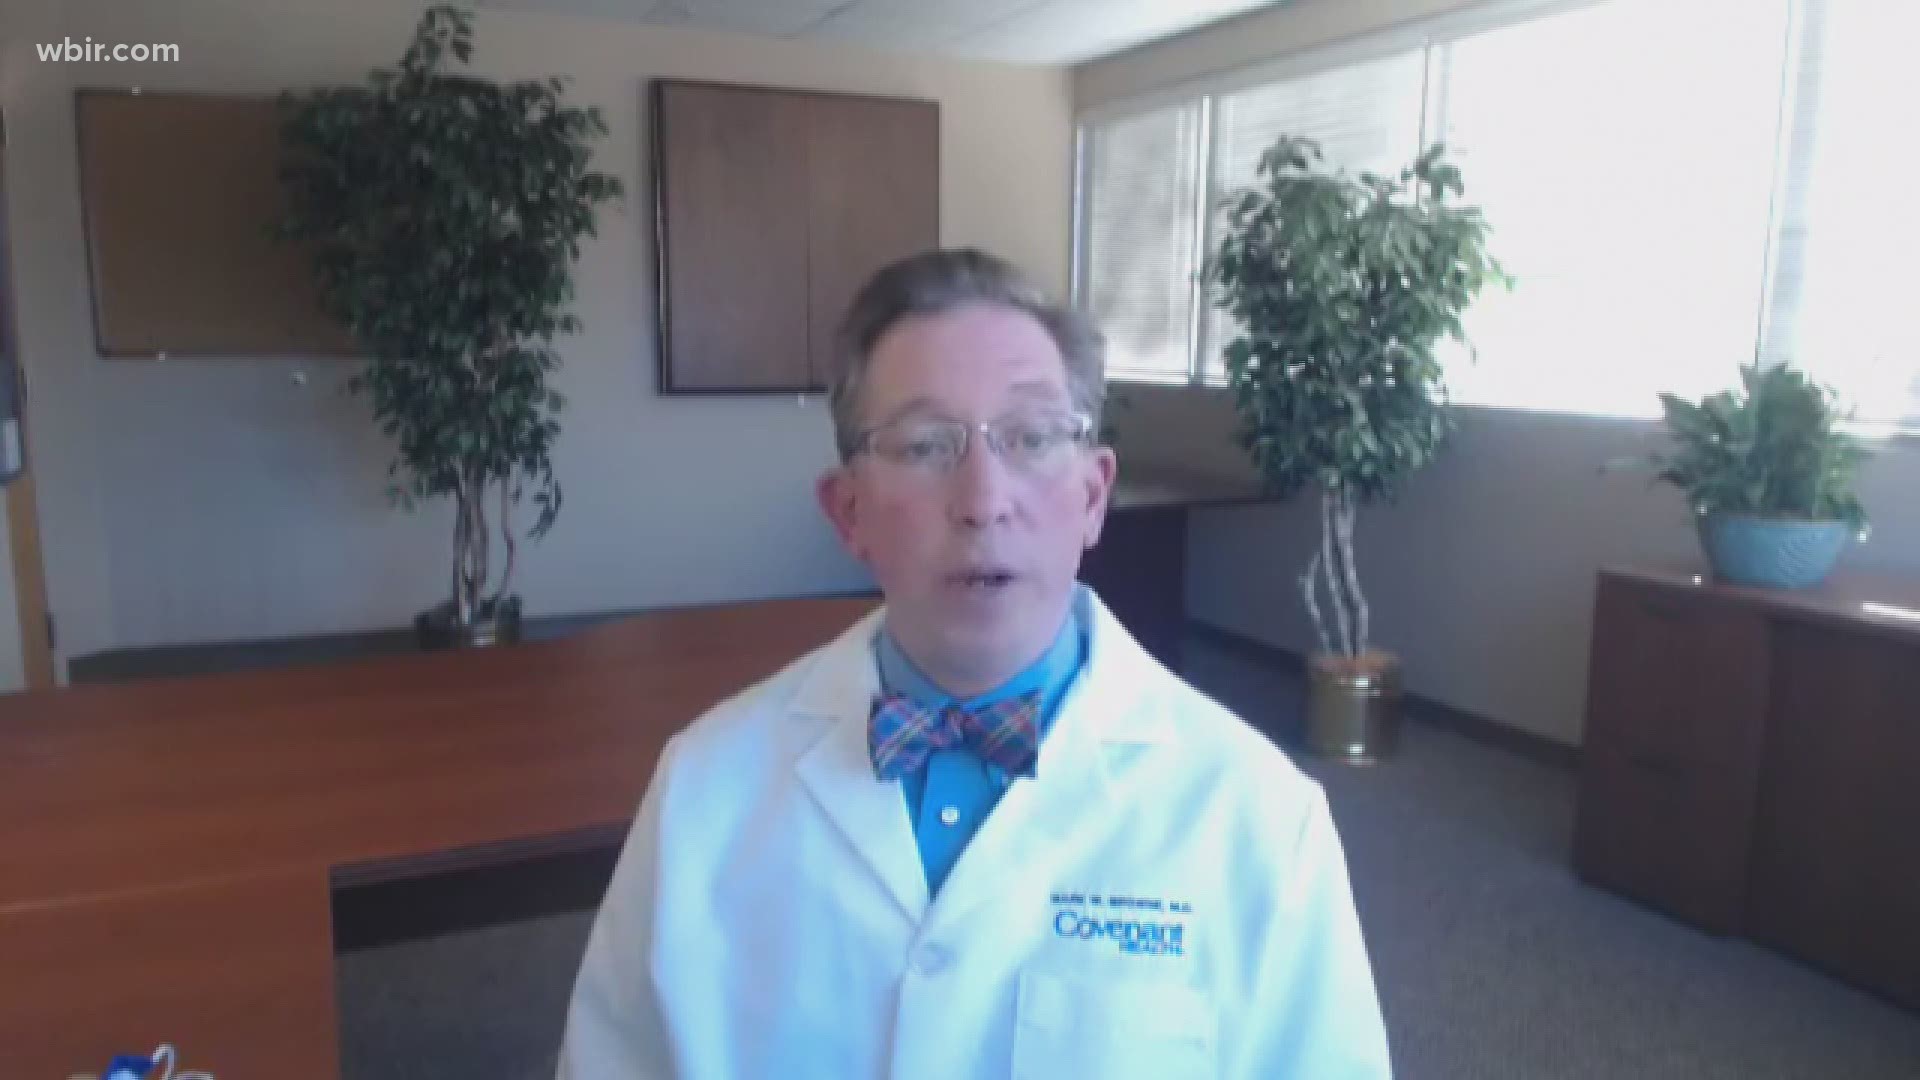 An East TN doctor addresses the benefits of mask-wearing against the spread of seasonal flu.